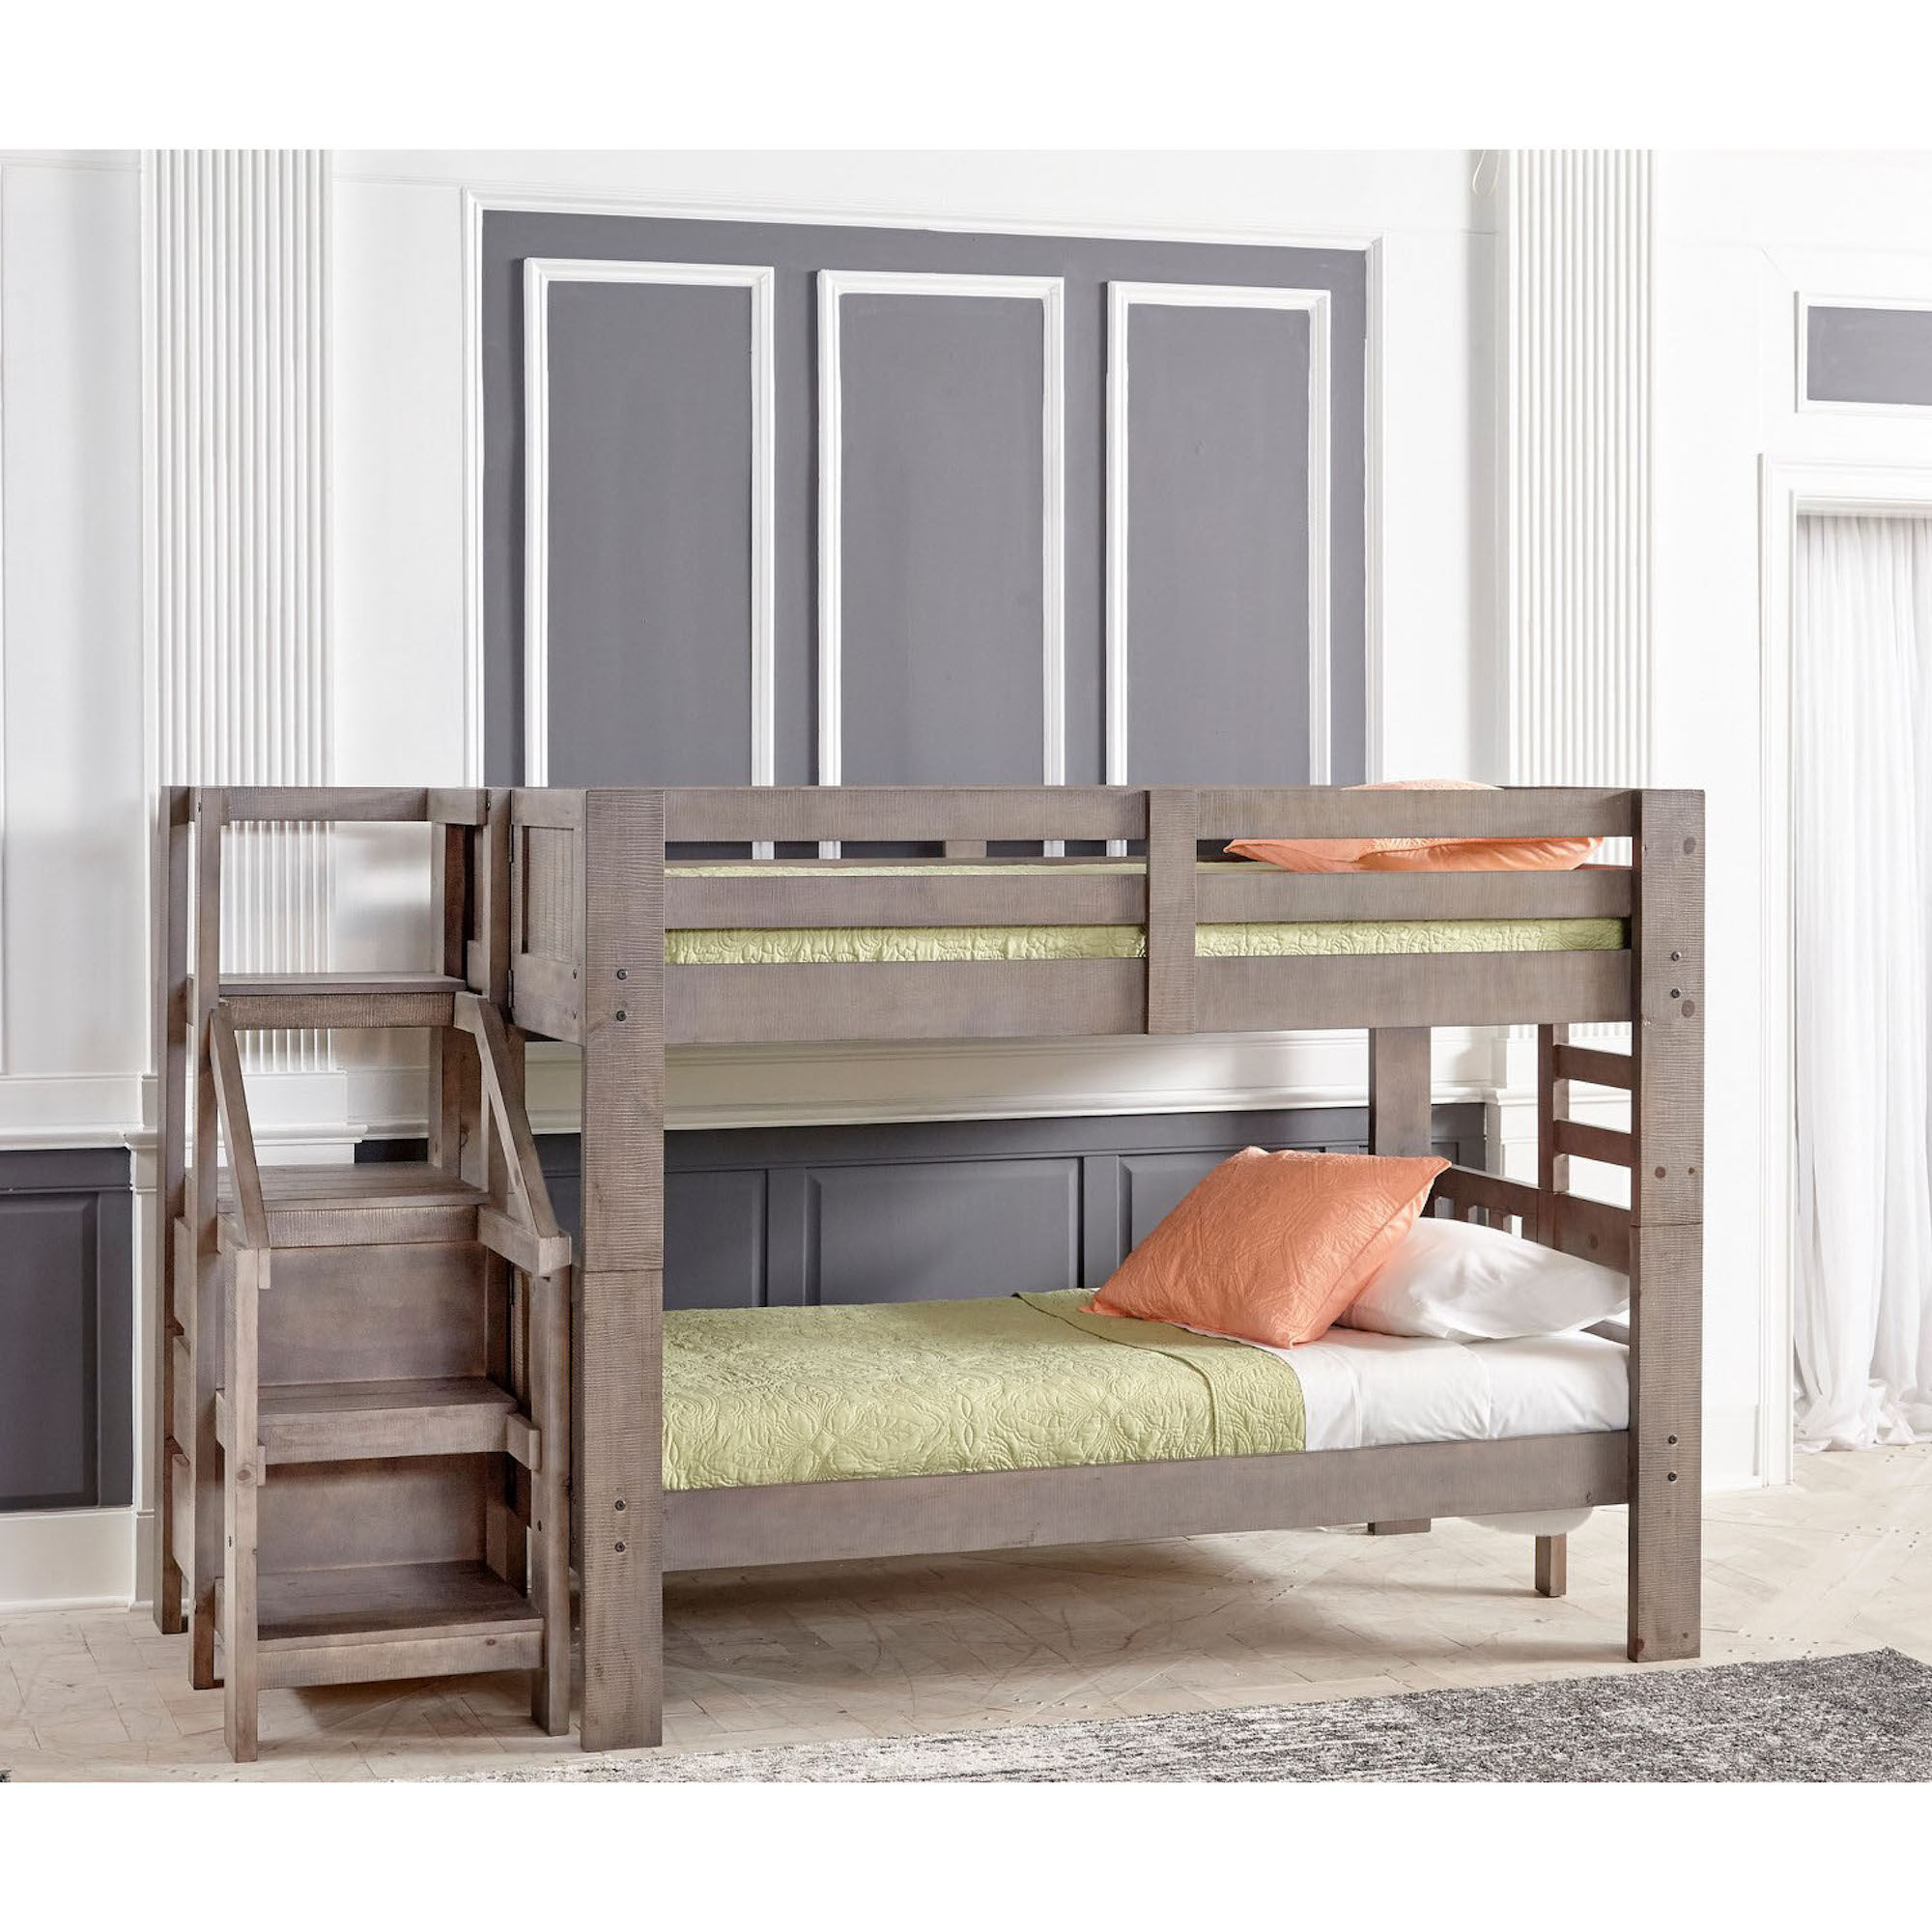 twin bunk beds for sale near me